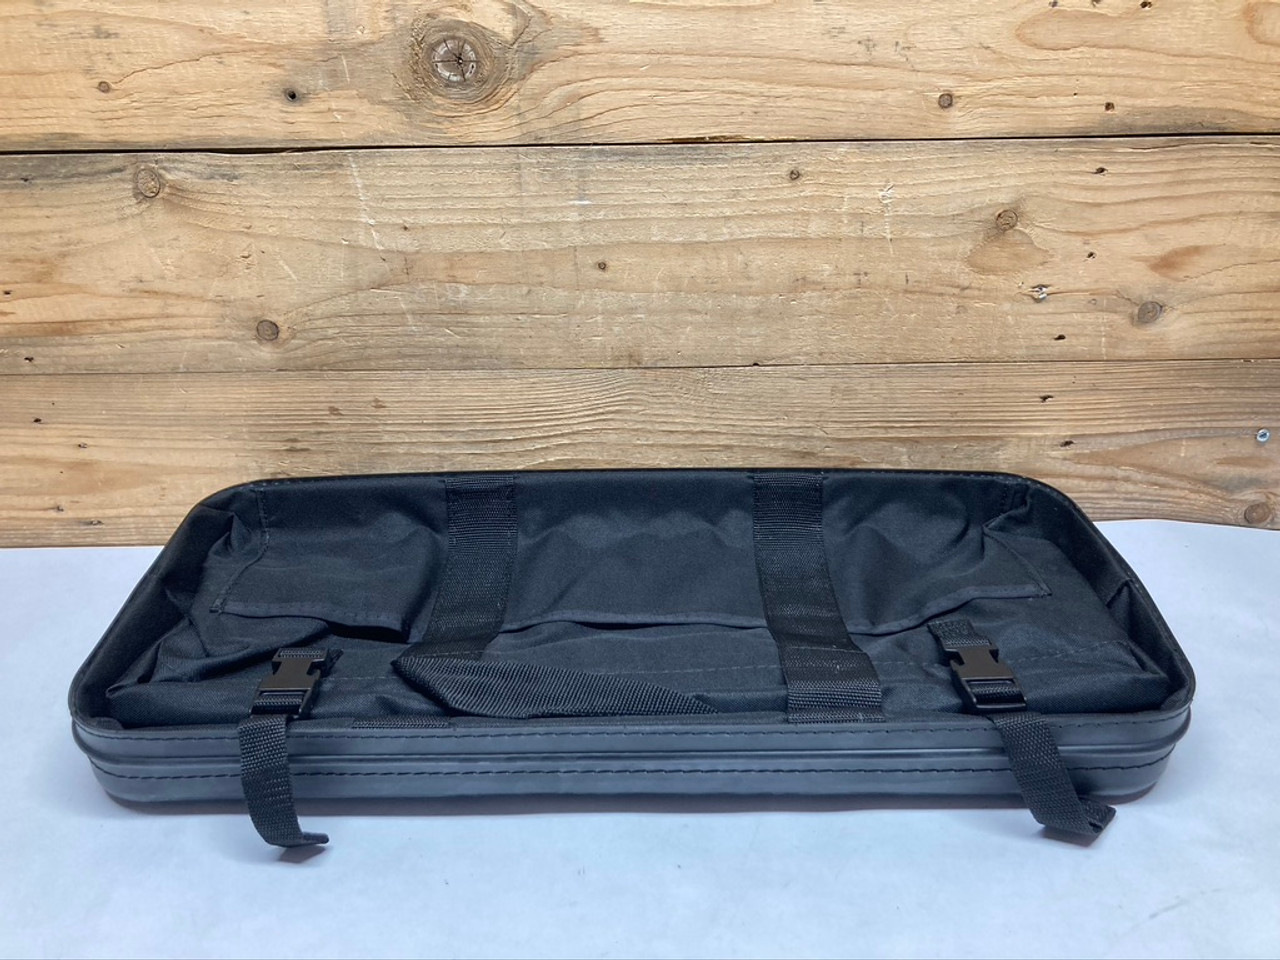 Vehicular Tool Bag 4007575 Force Protection